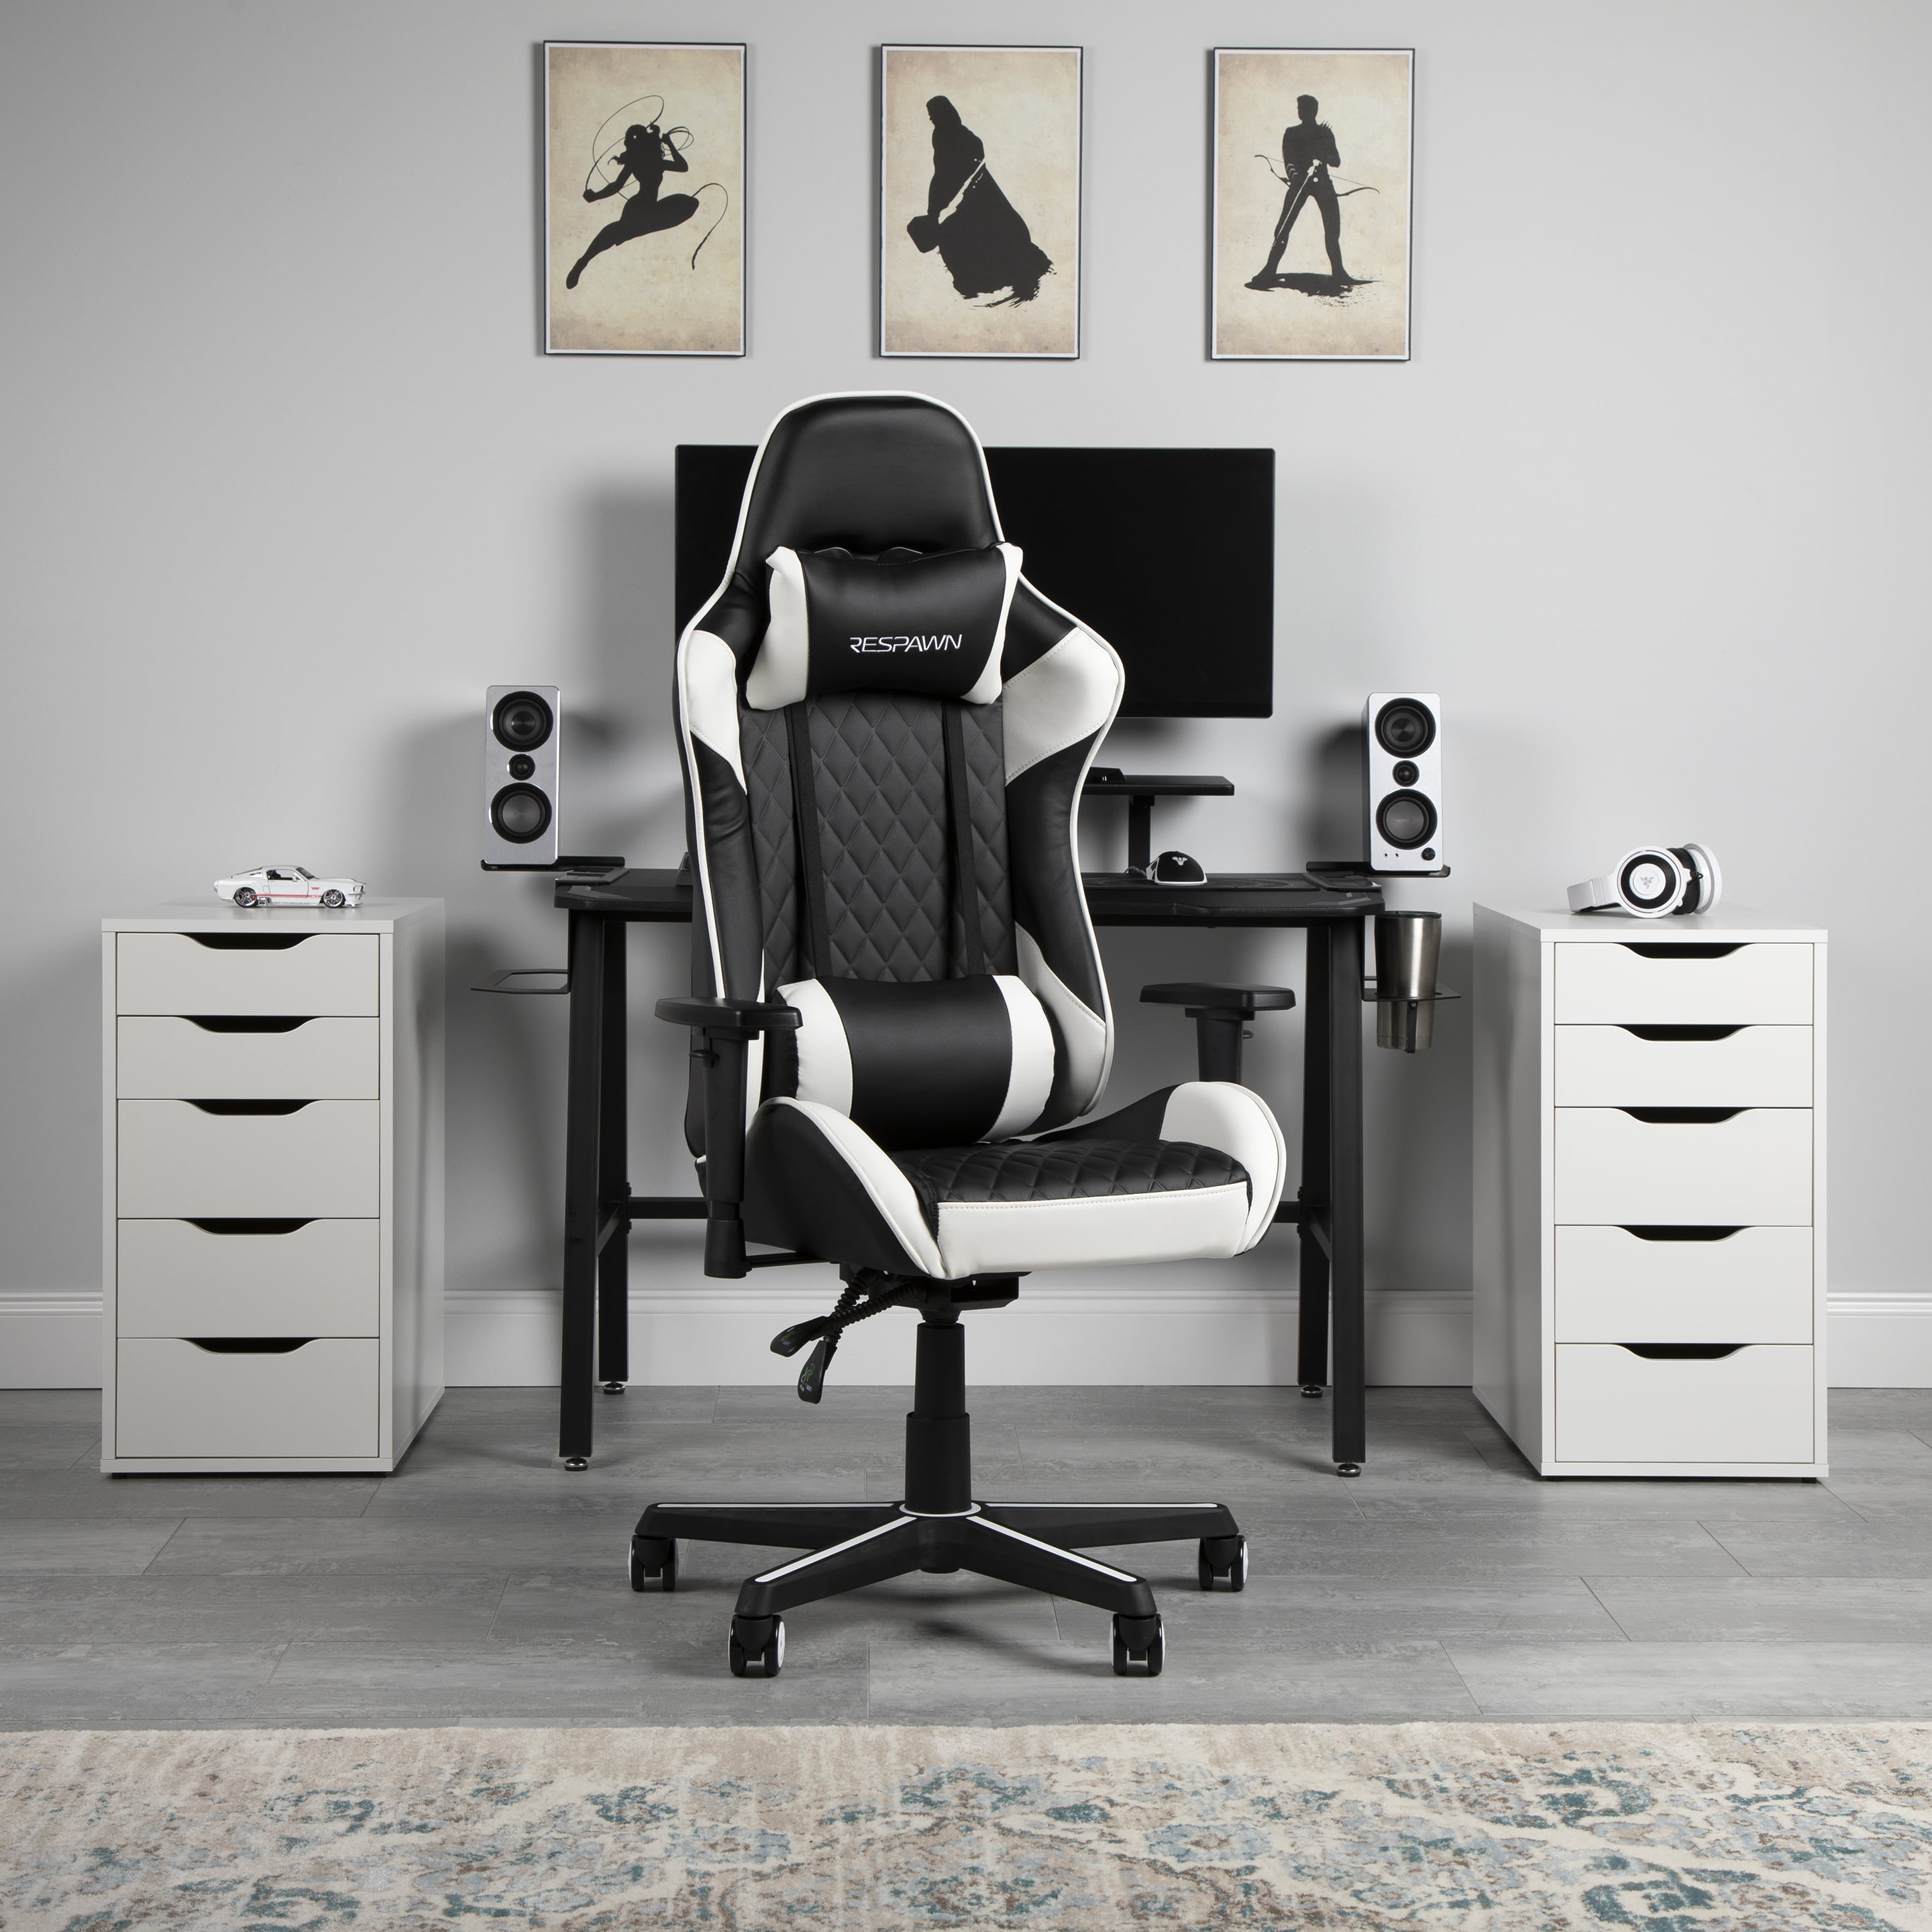 RESPAWN-100 Racing Style Gaming Chair - Reclining Ergonomic Leather